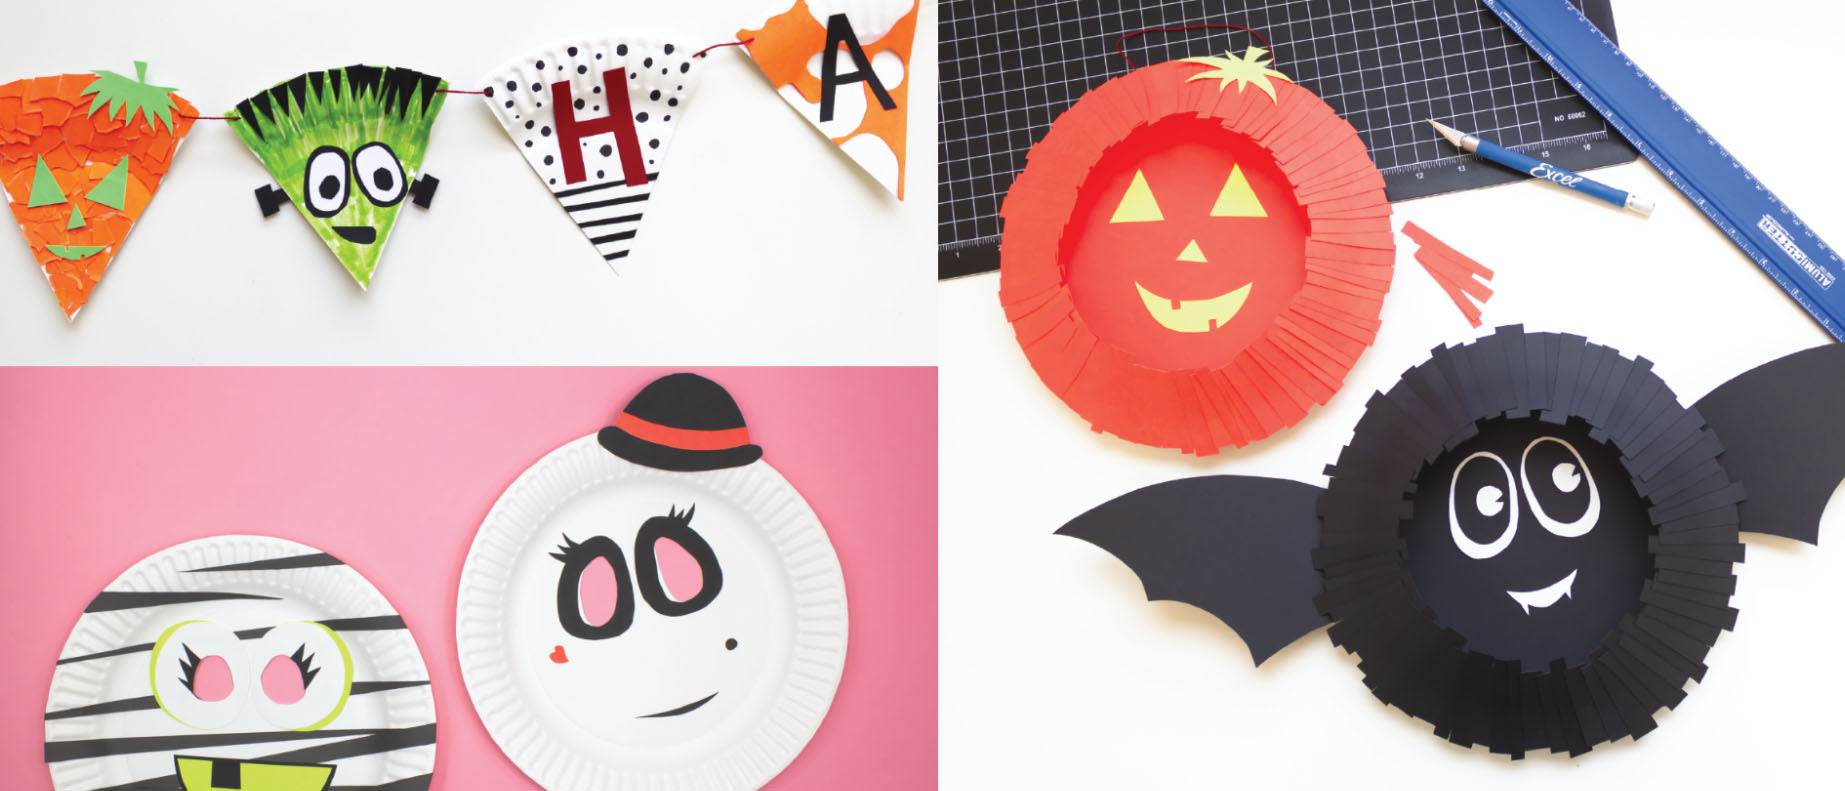 Perfect Stix Paper Plate  Paper plates, Paper plate crafts, Plates